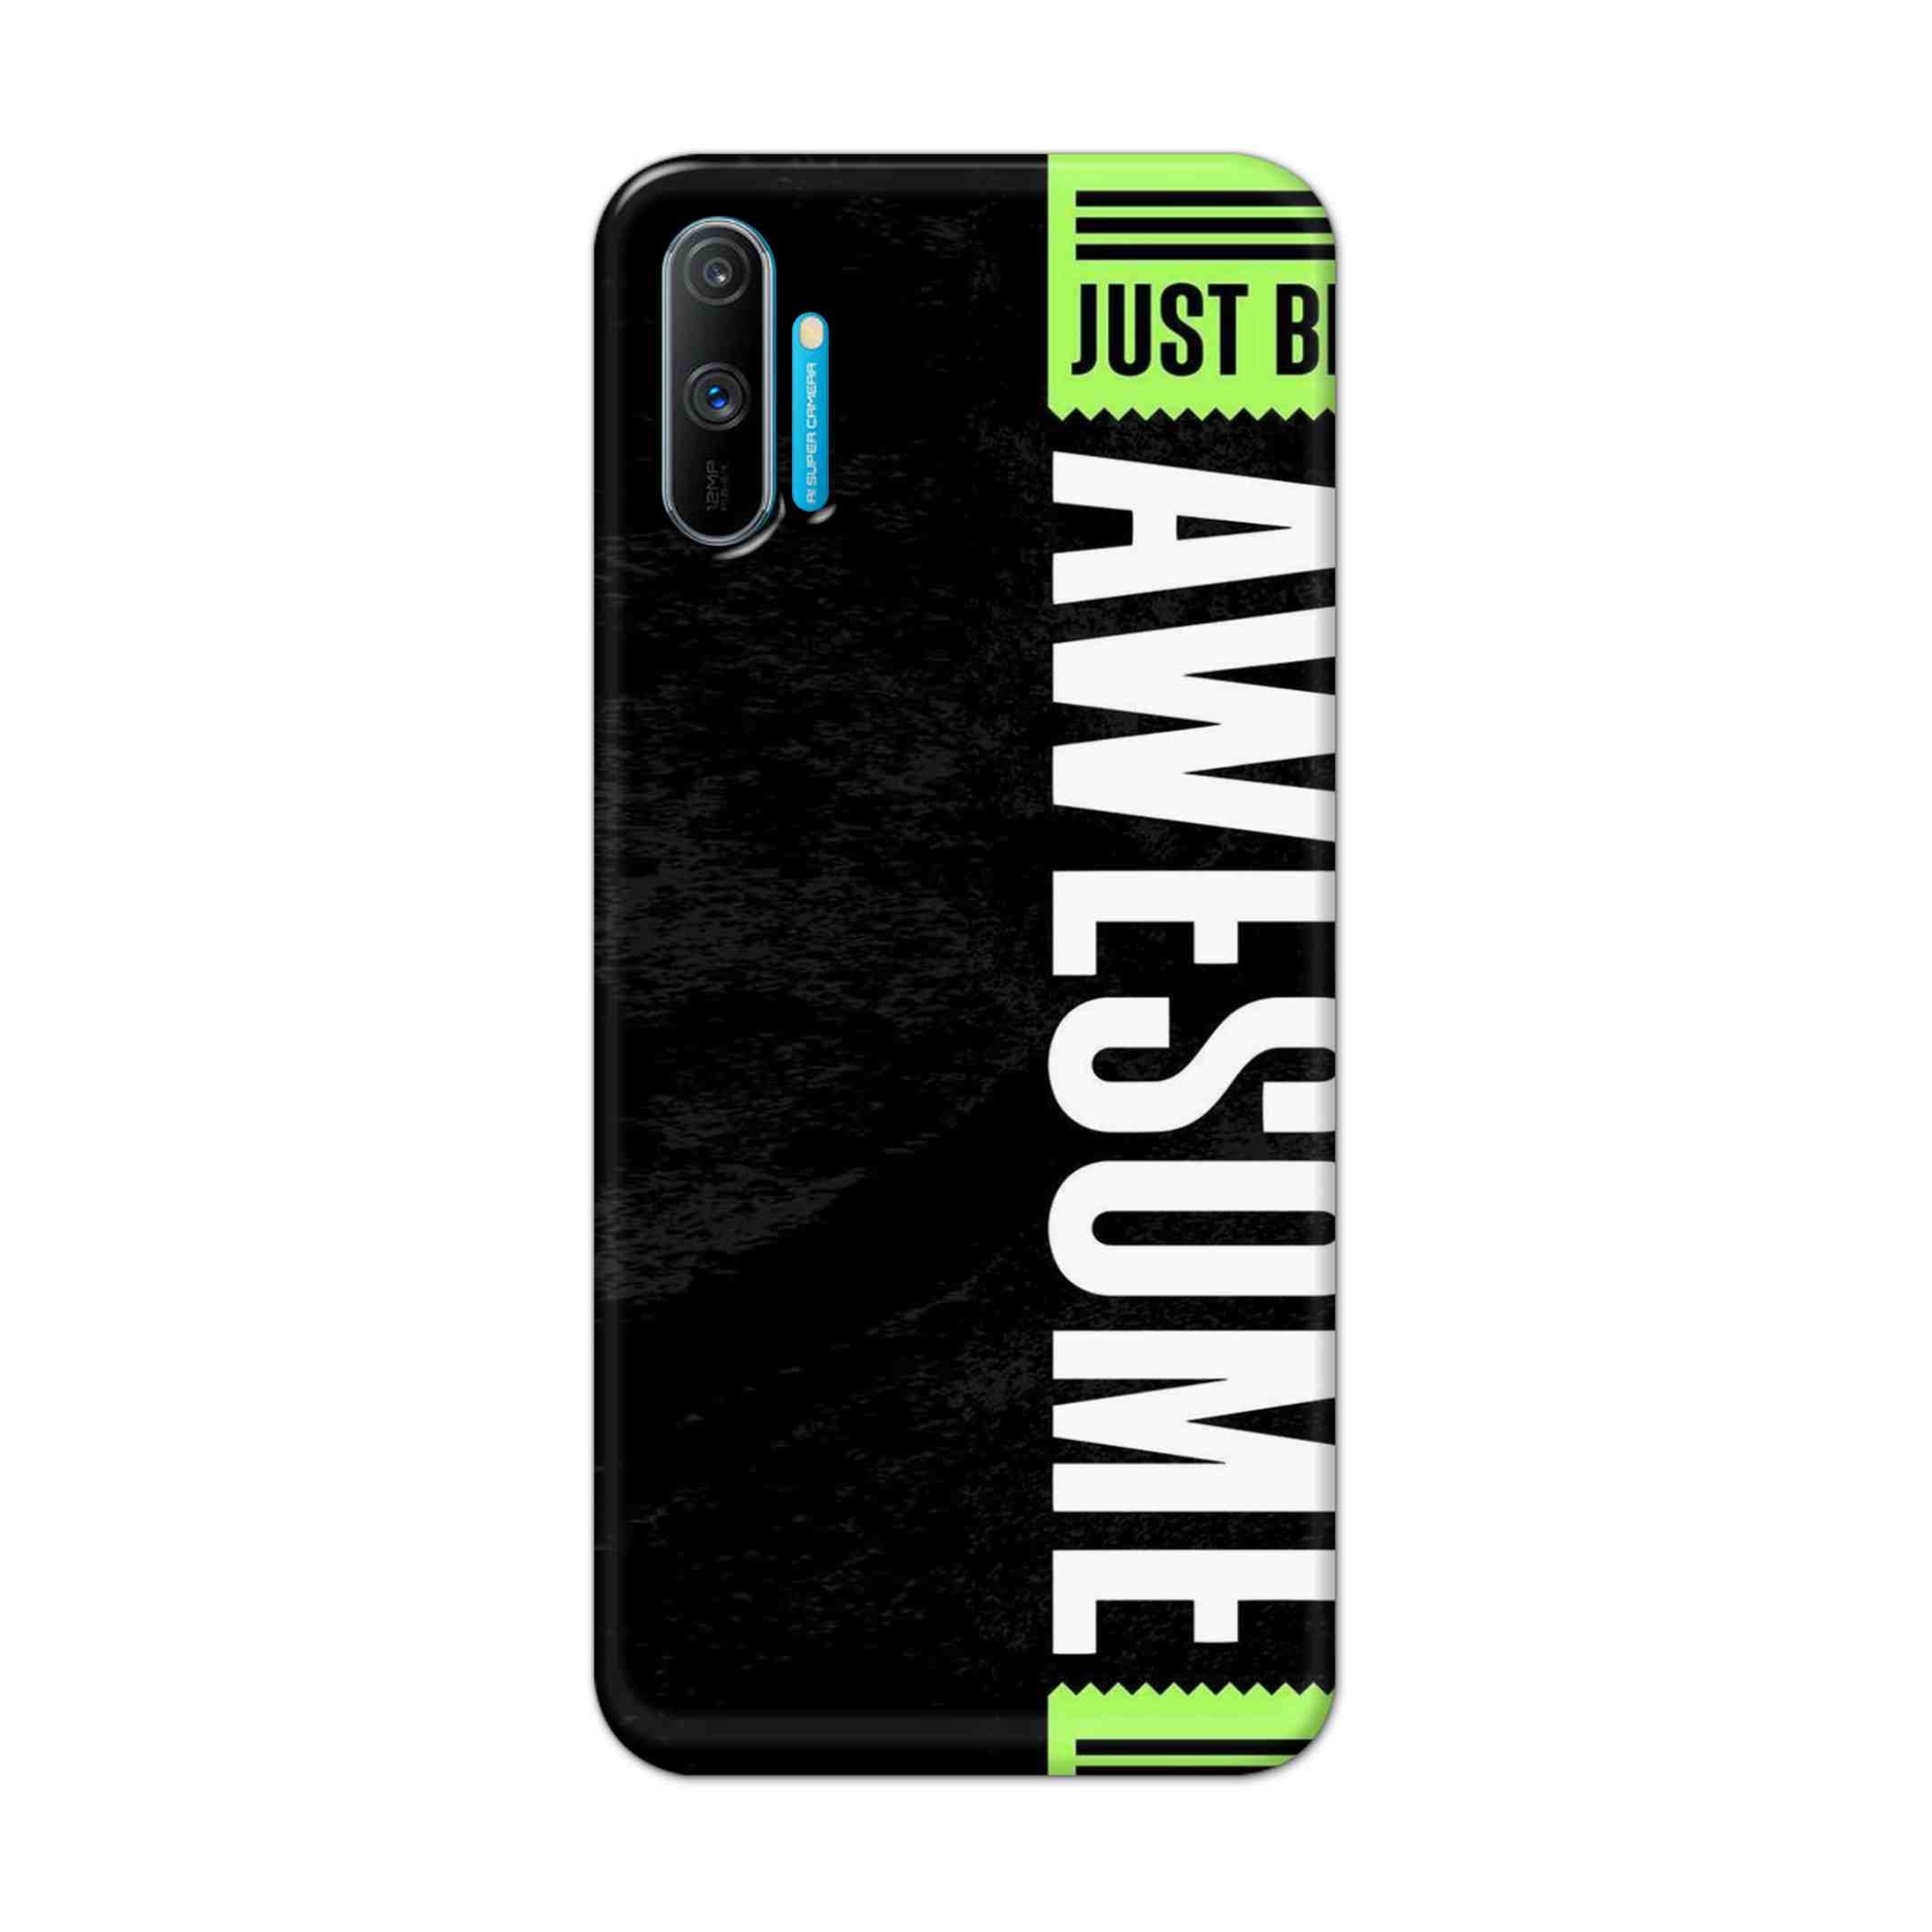 Buy Awesome Street Hard Back Mobile Phone Case Cover For Realme C3 Online